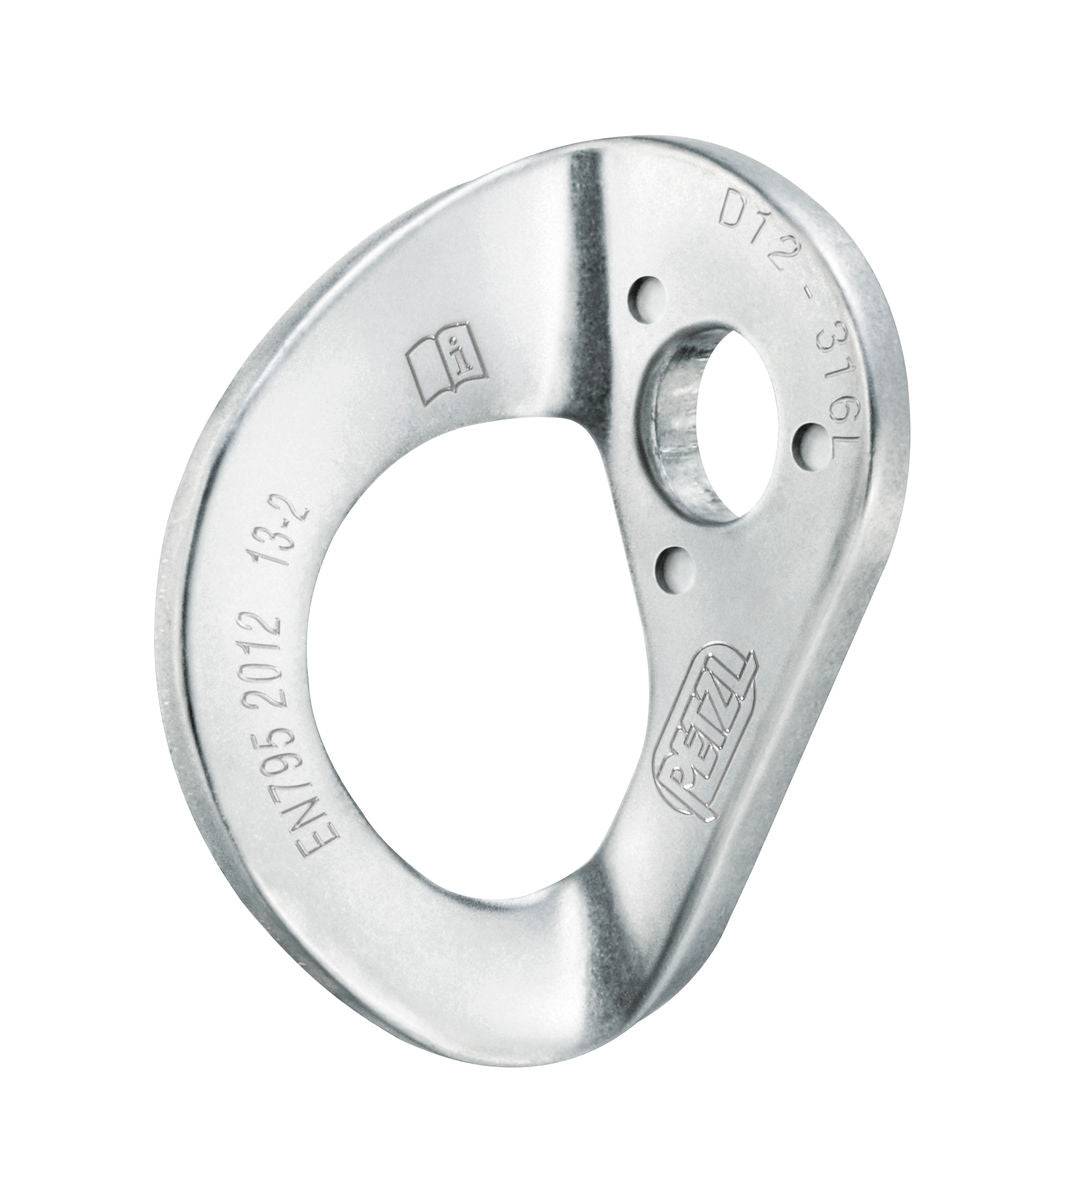 Petzl COEUR STAINLESS Steel High Quality Bolt Hanger for Typical Exterior Uses (Pack of 20) - SecureHeights